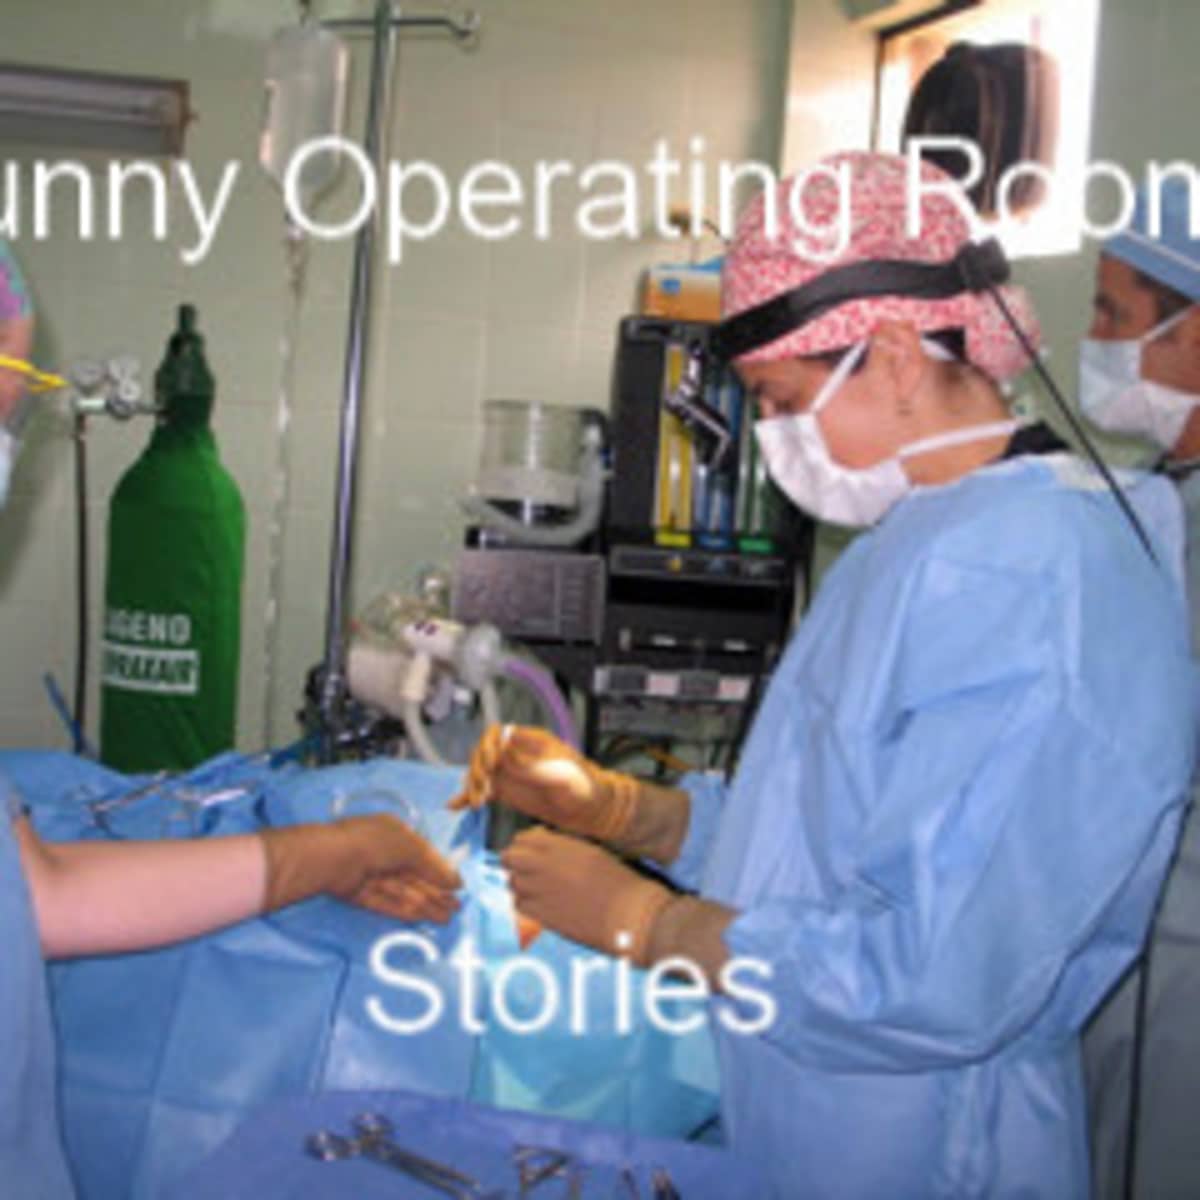 Funny Stories About the Operating Room - ToughNickel